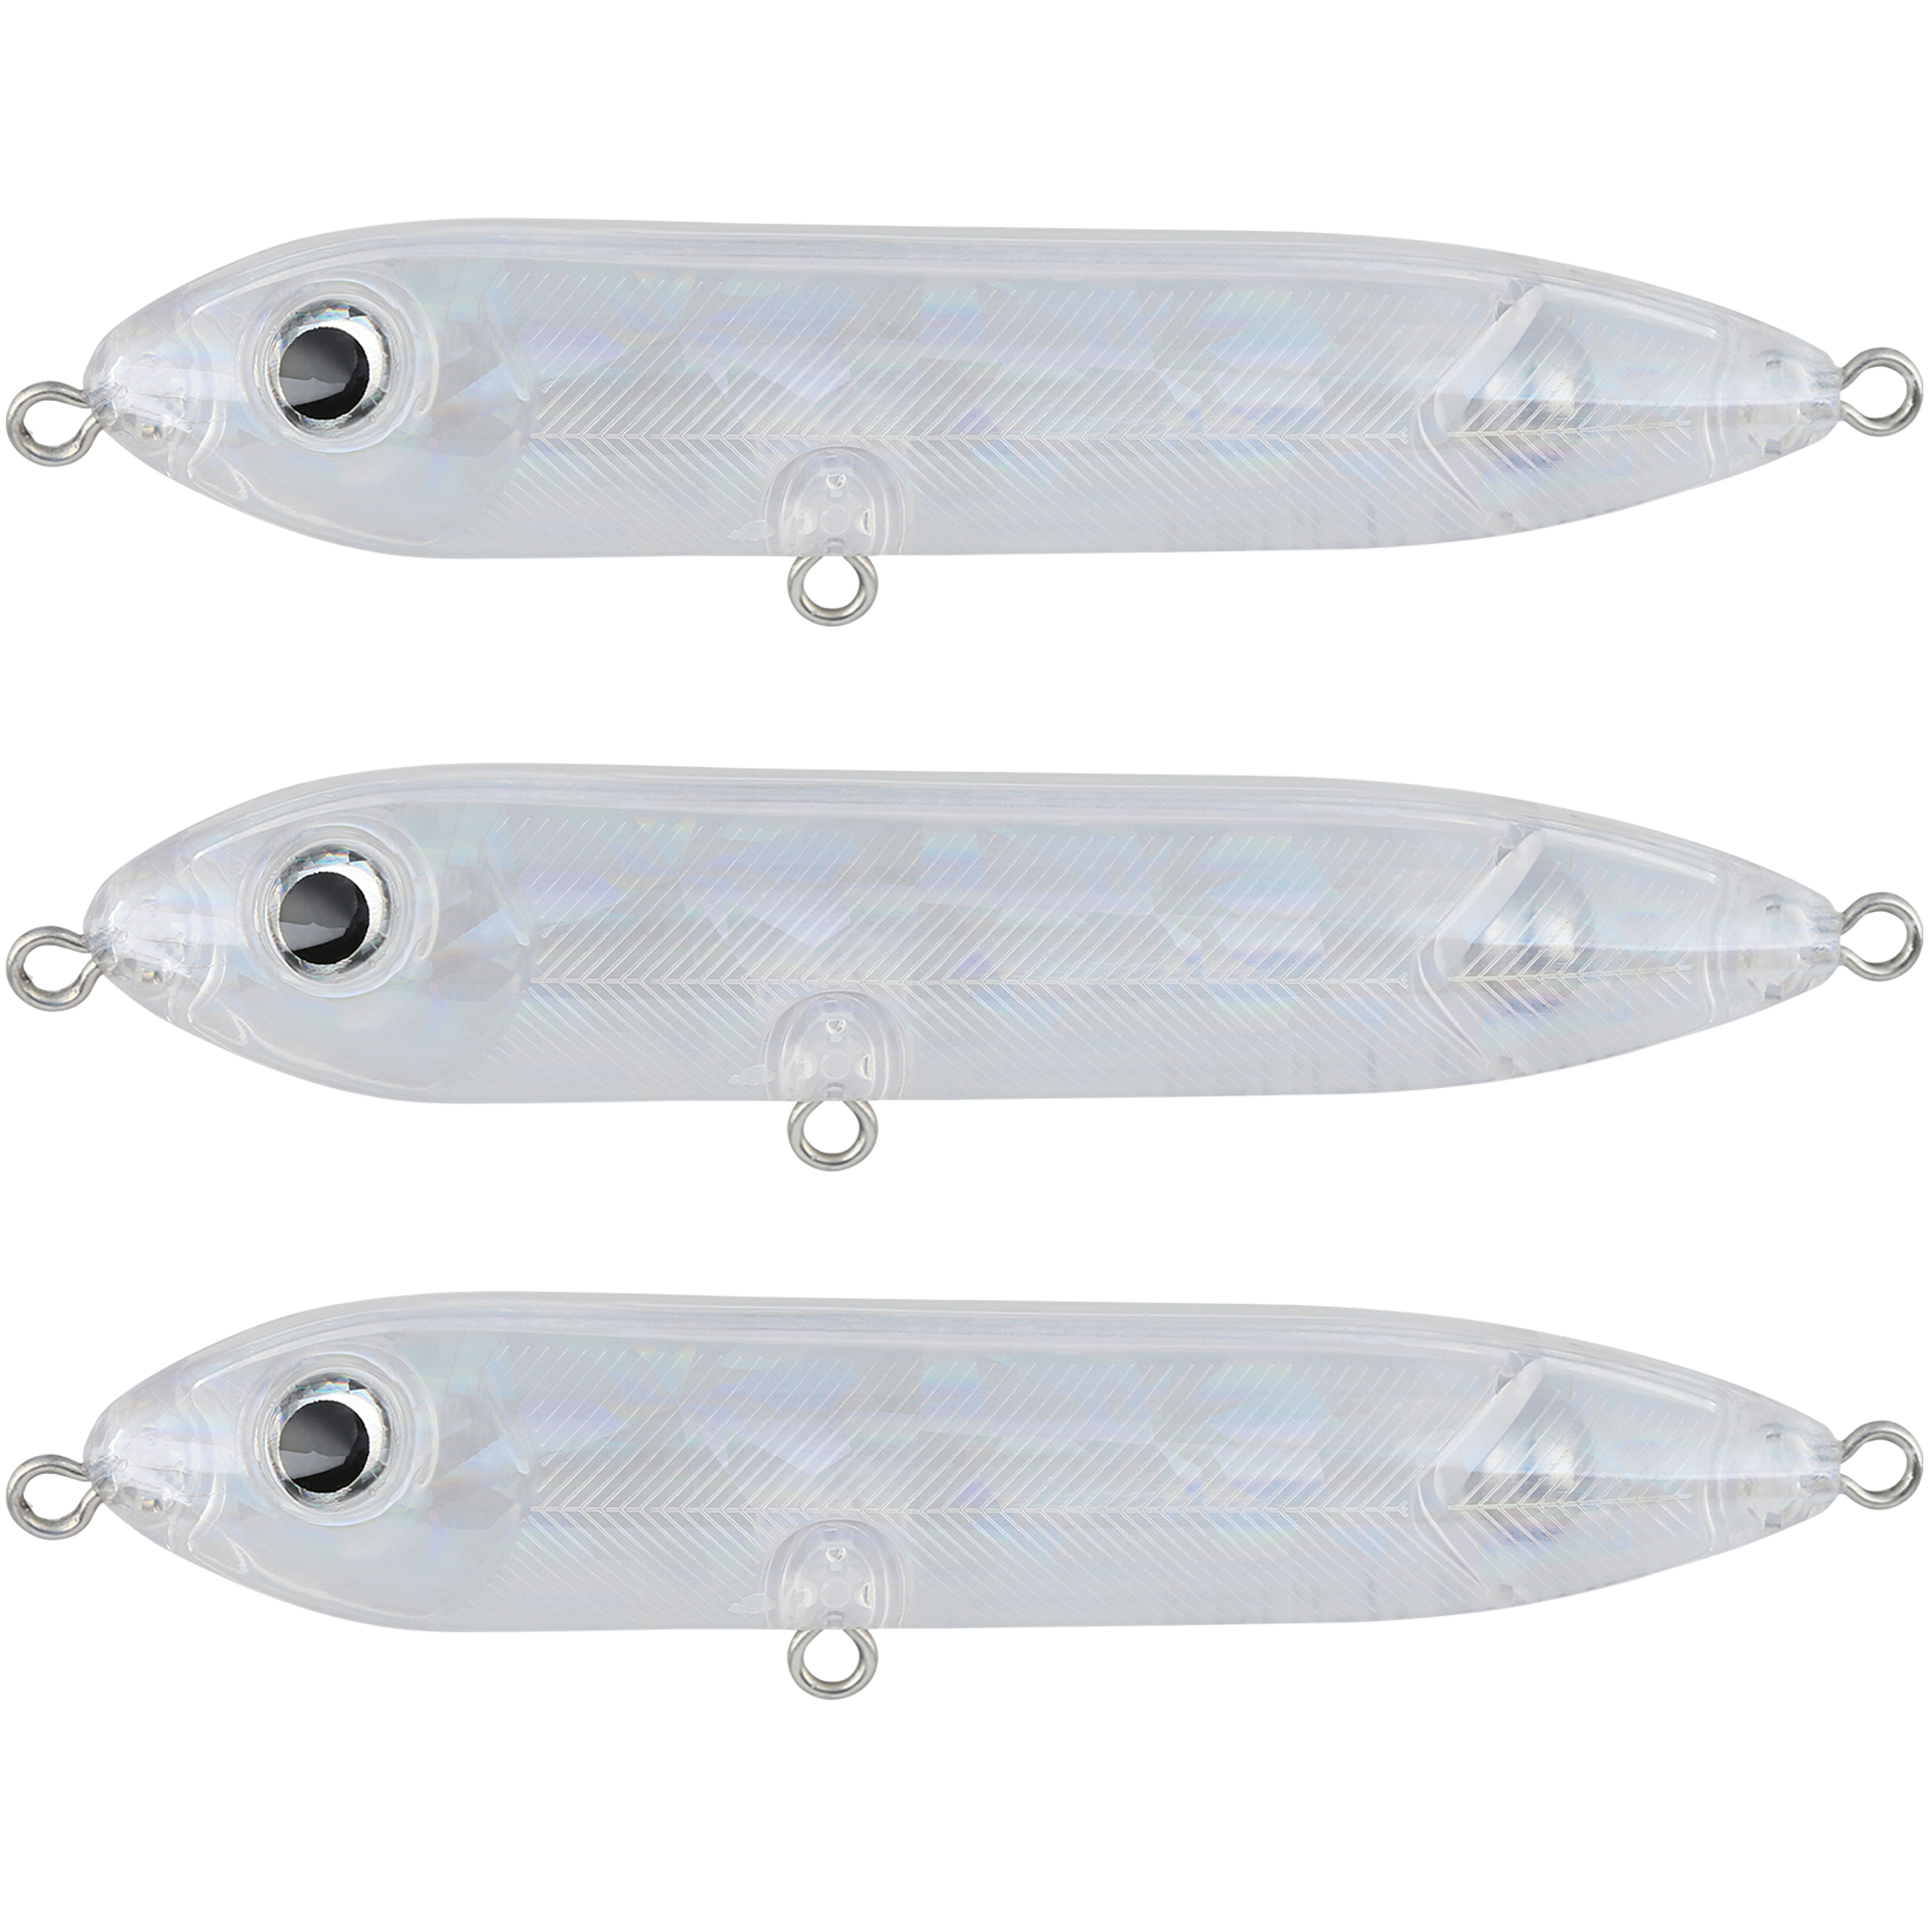 Catfish Rattling Line Float Lure for Catfishing, Demon Dragon Style Peg for Santee Rig Fishing, 4 inch (3-Pack, Ghost Minnow)